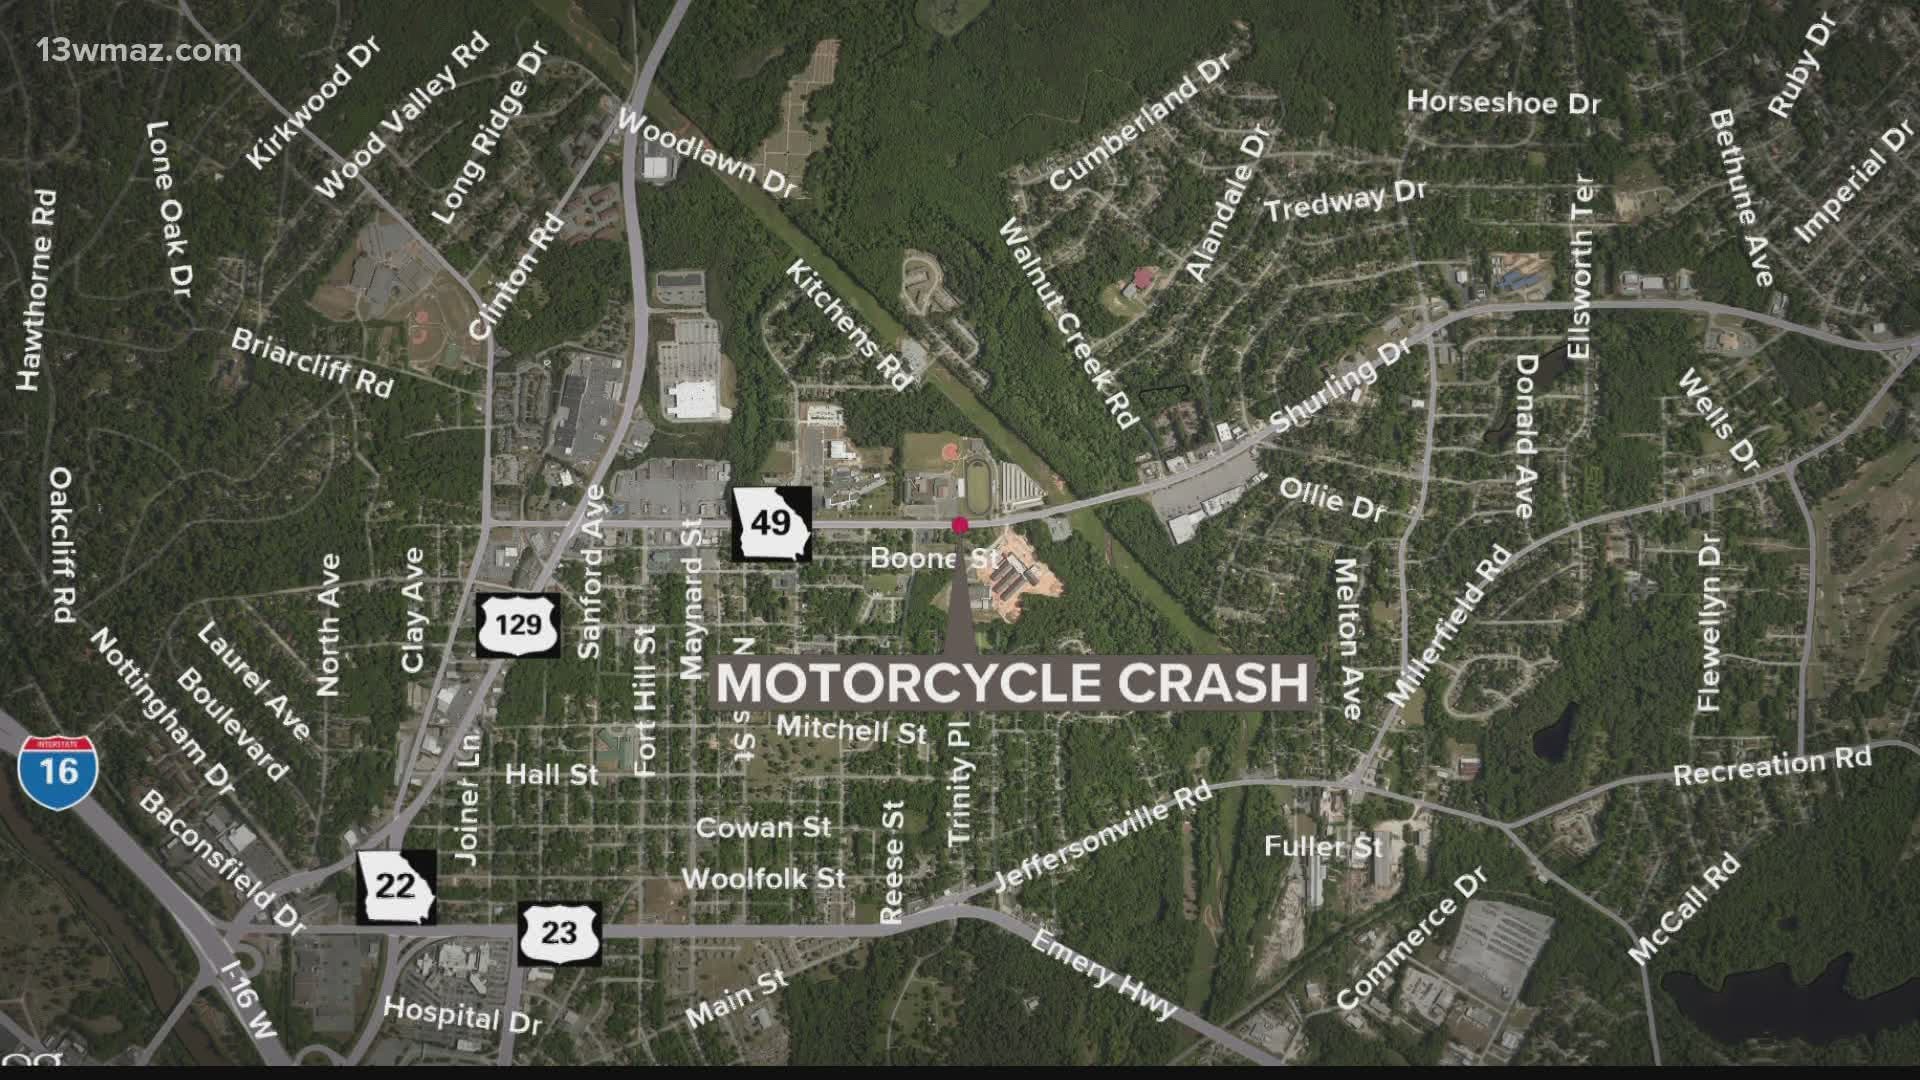 One person is dead after a motorcycle crash in Macon Sunday night.